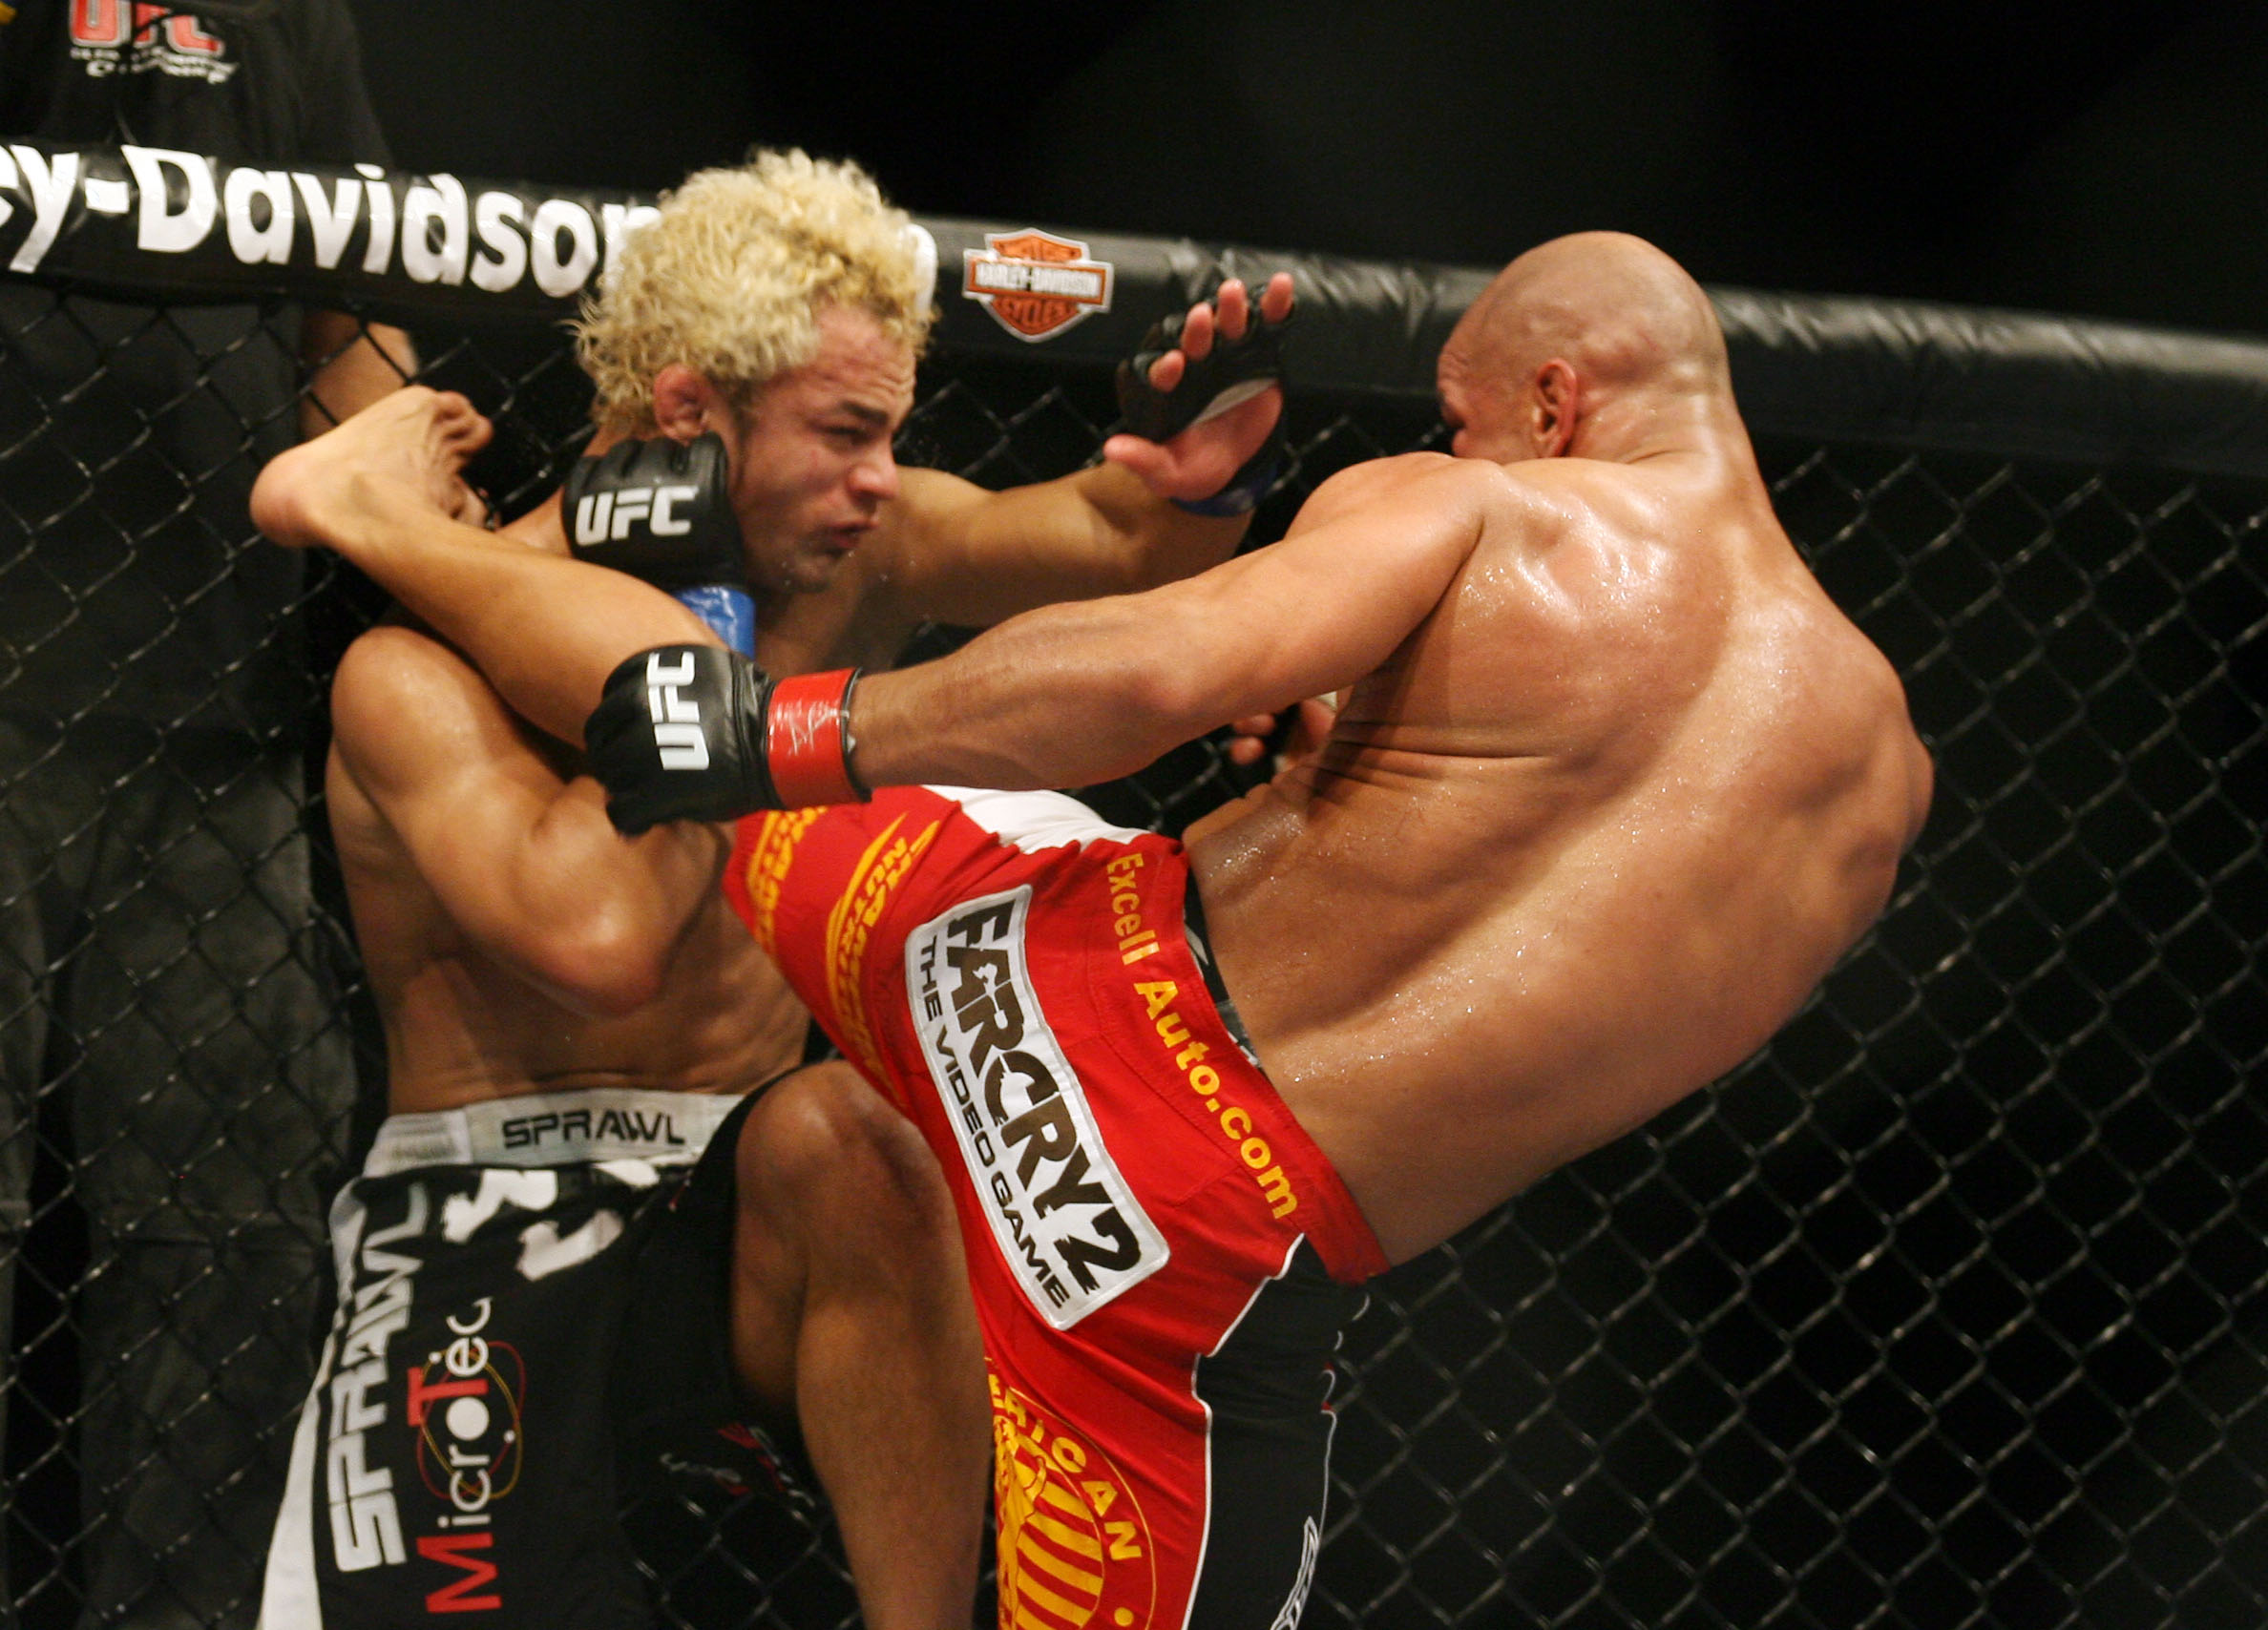 CHICAGO- OCTOBER 25:  Josh Koscheck (L) fights Thiago Alves in a Welterweight bout  at UFC's Ultimate Fight Night at Allstate Arena on October 25, 2008 in Chicago, Illinois. (Photo by Tasos Katopodis/Getty Images)